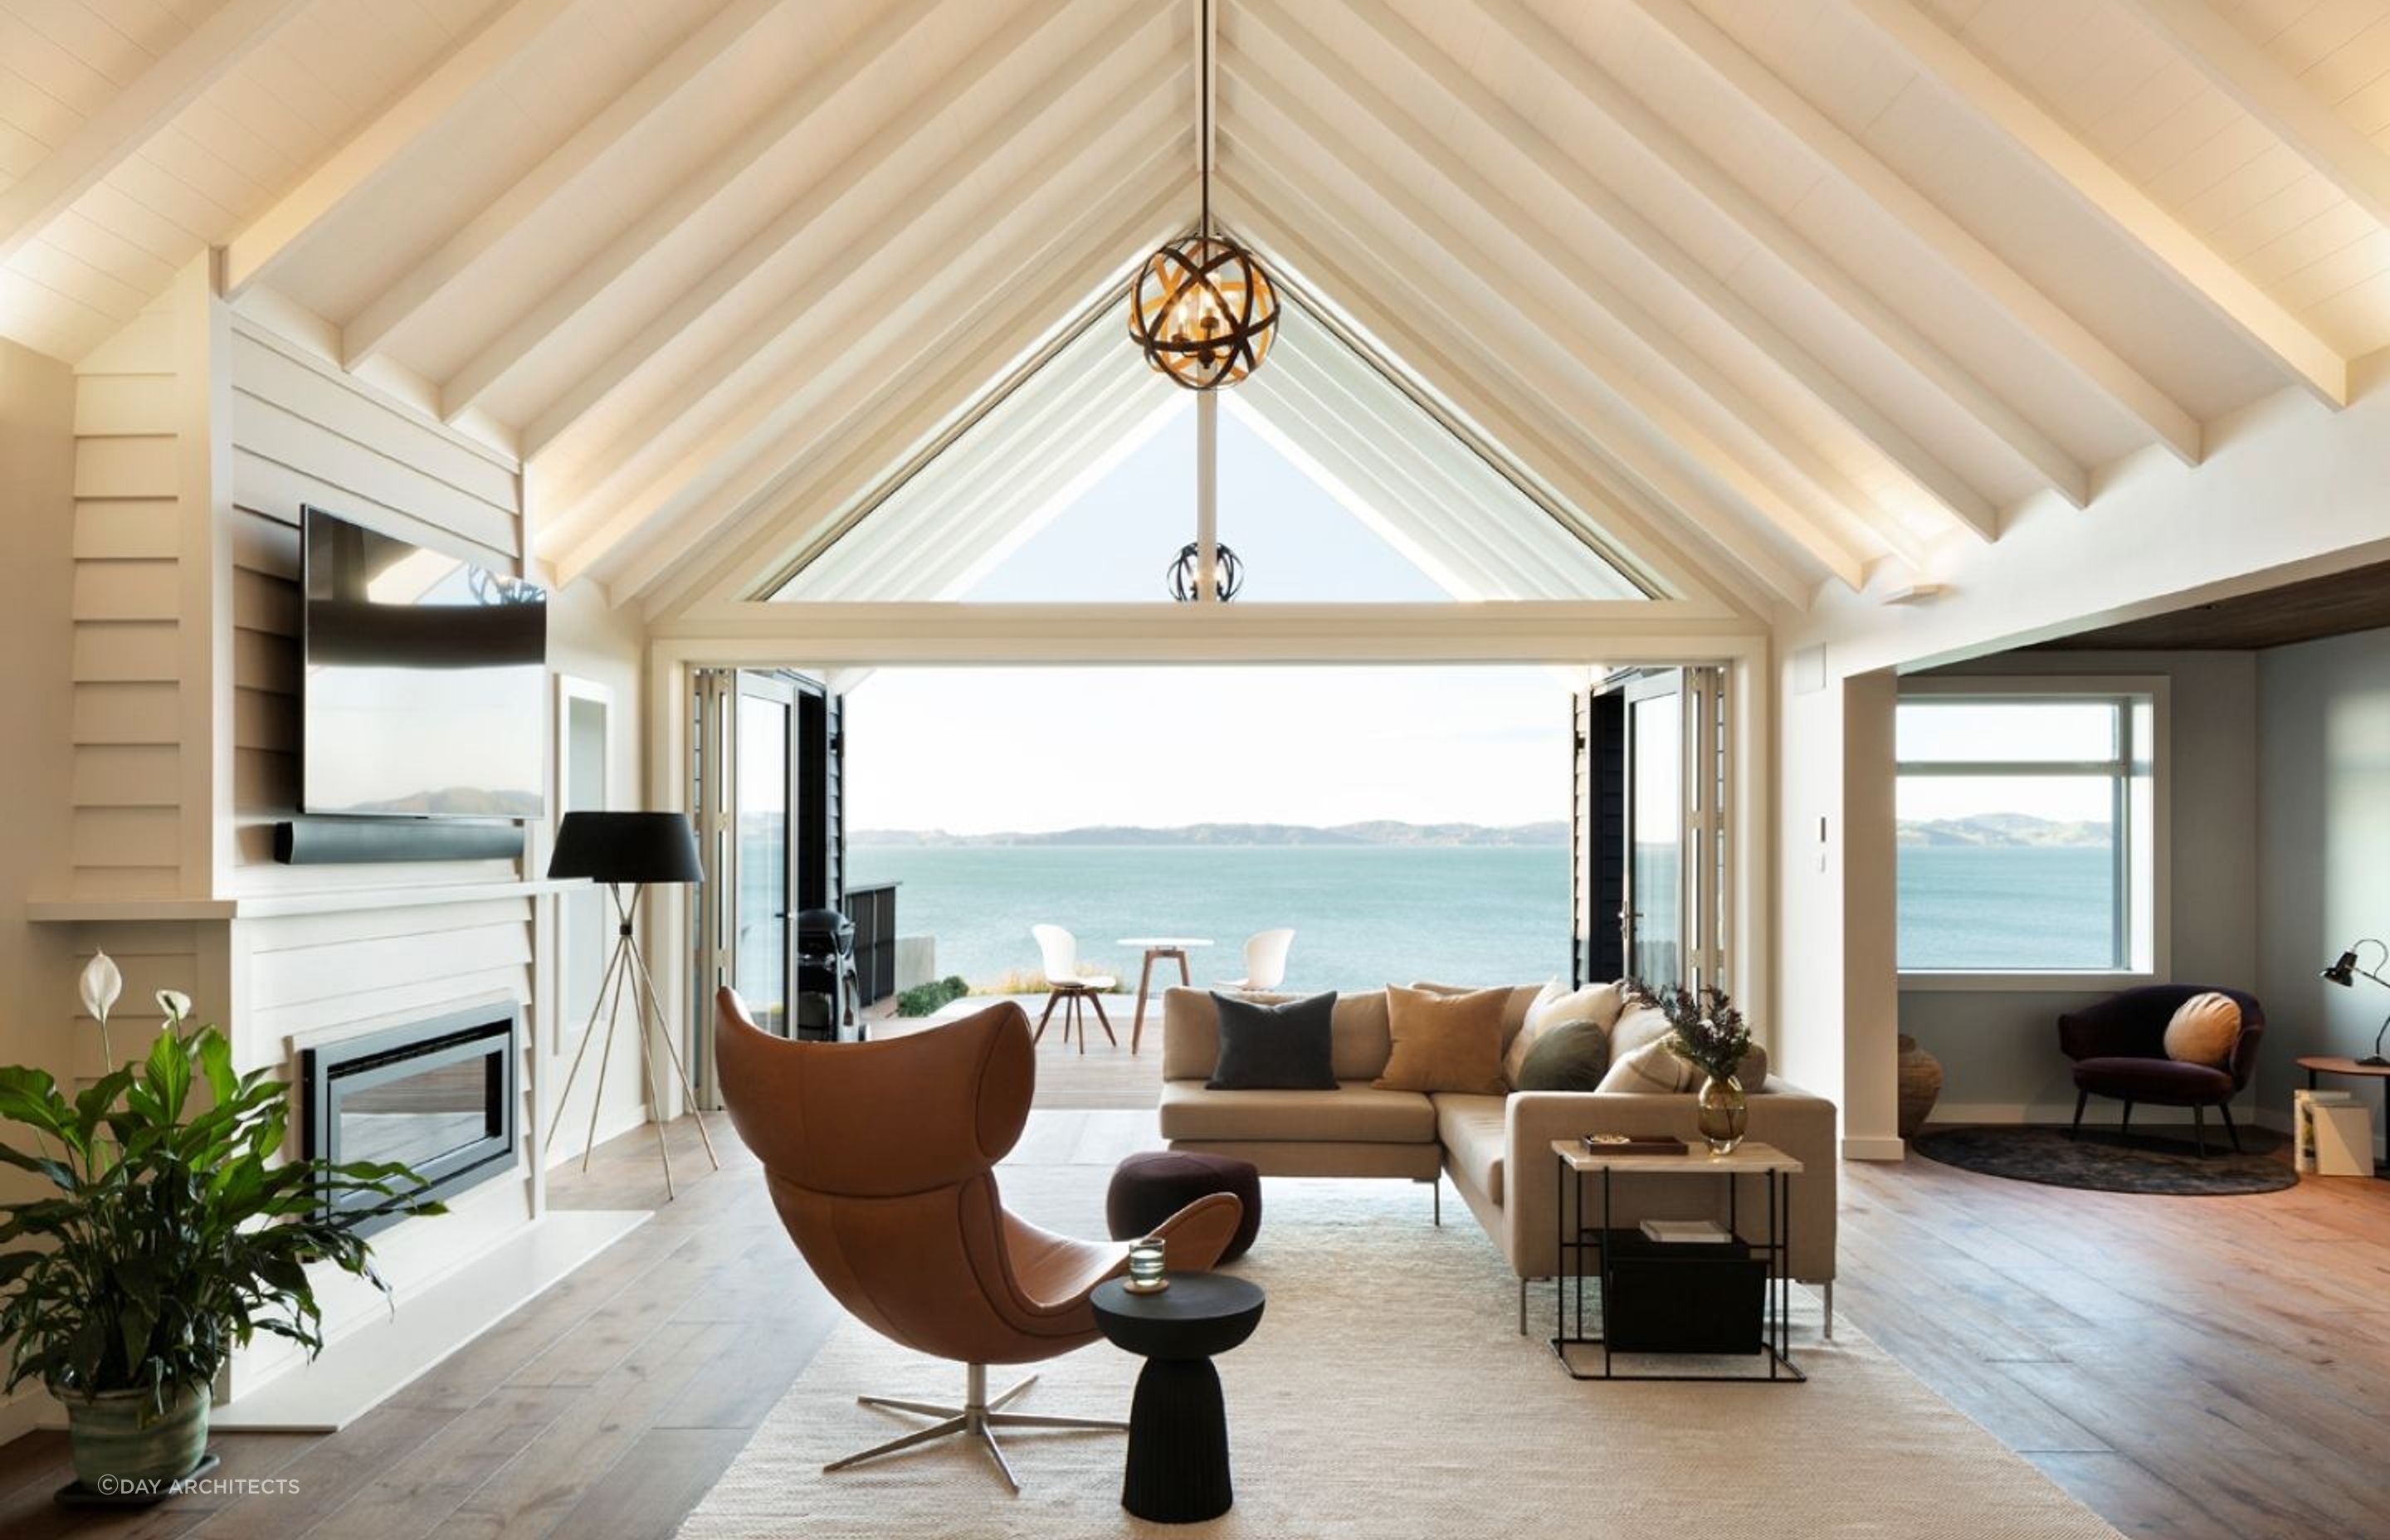 The living spaces are orientated to take advantage of stunning coastal views. | Photography: Jessica Chloe